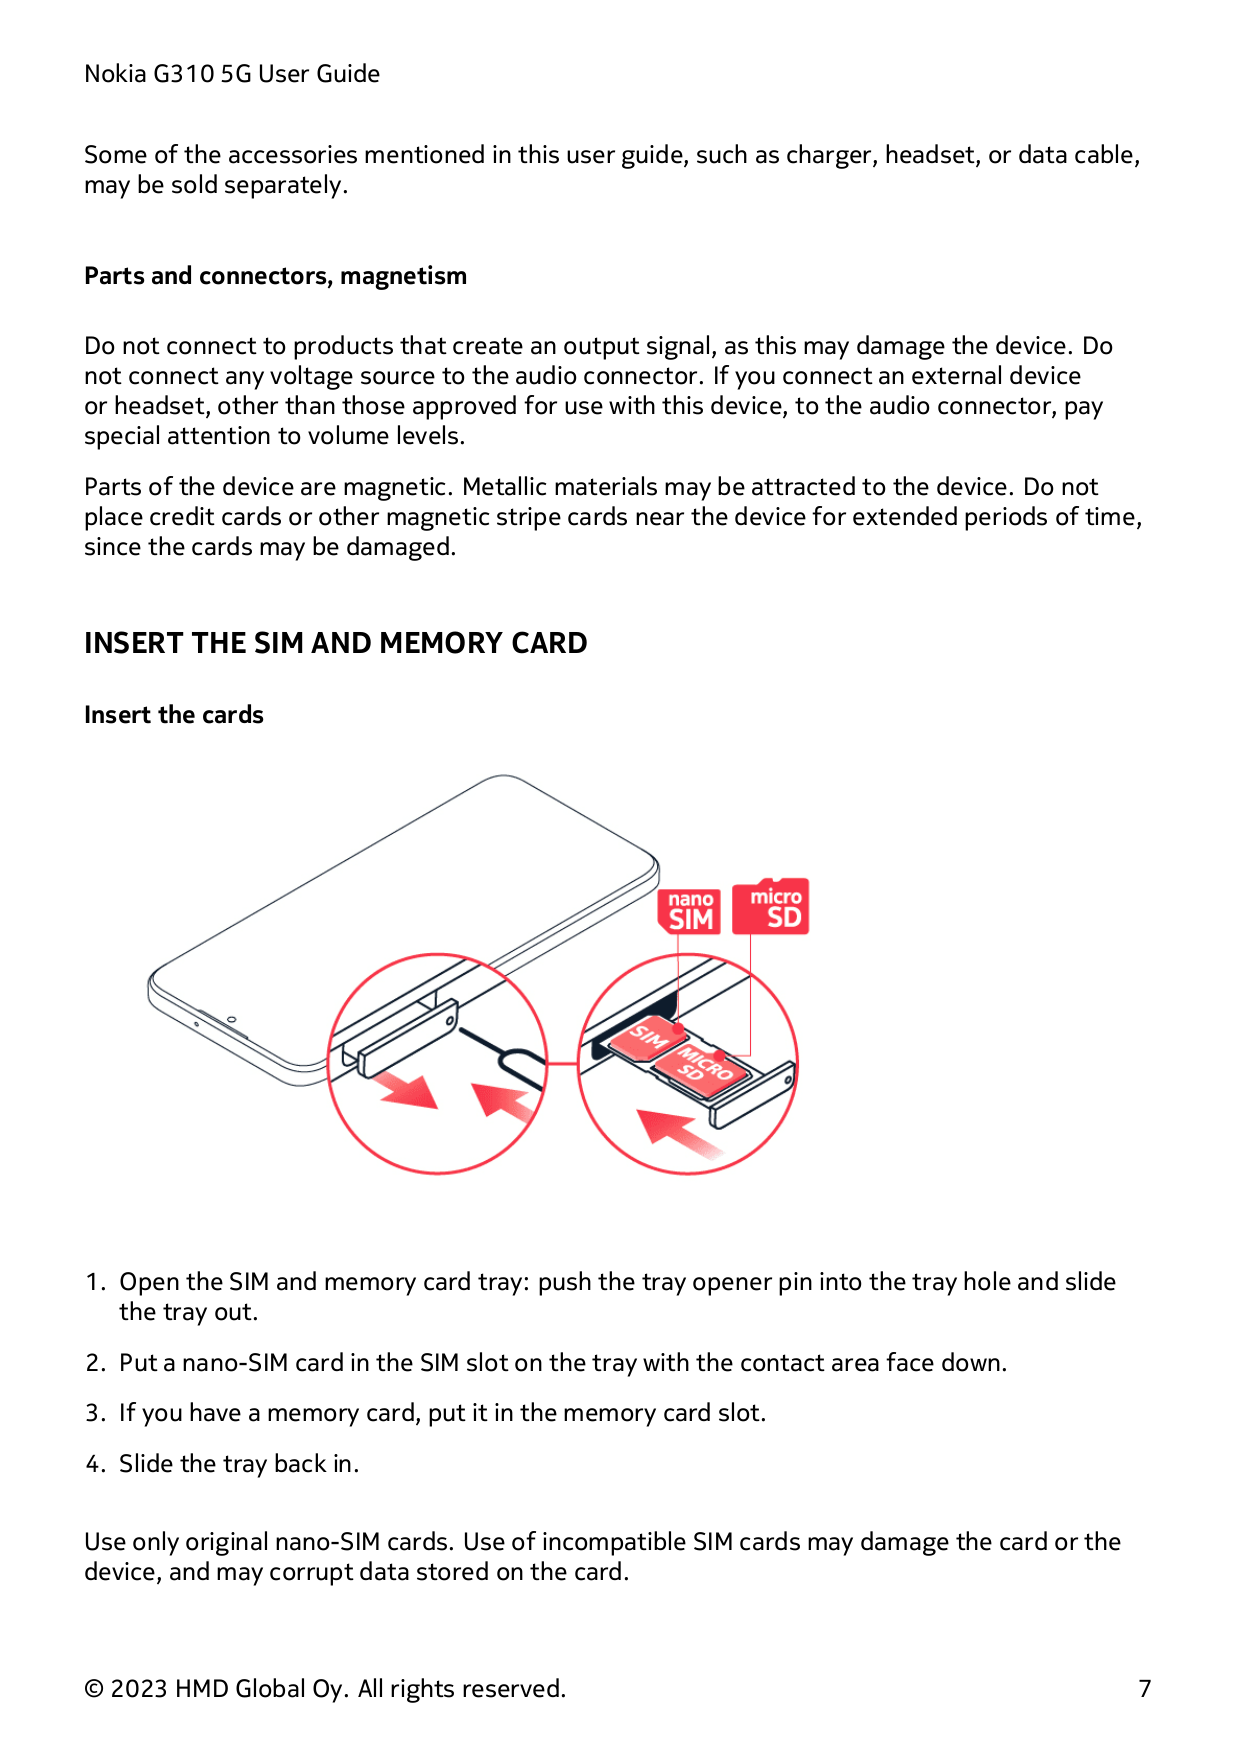 Nokia G310 5G User GuideSome of the accessories mentioned in this user guide, such as charger, headset, or data cable,may be sol